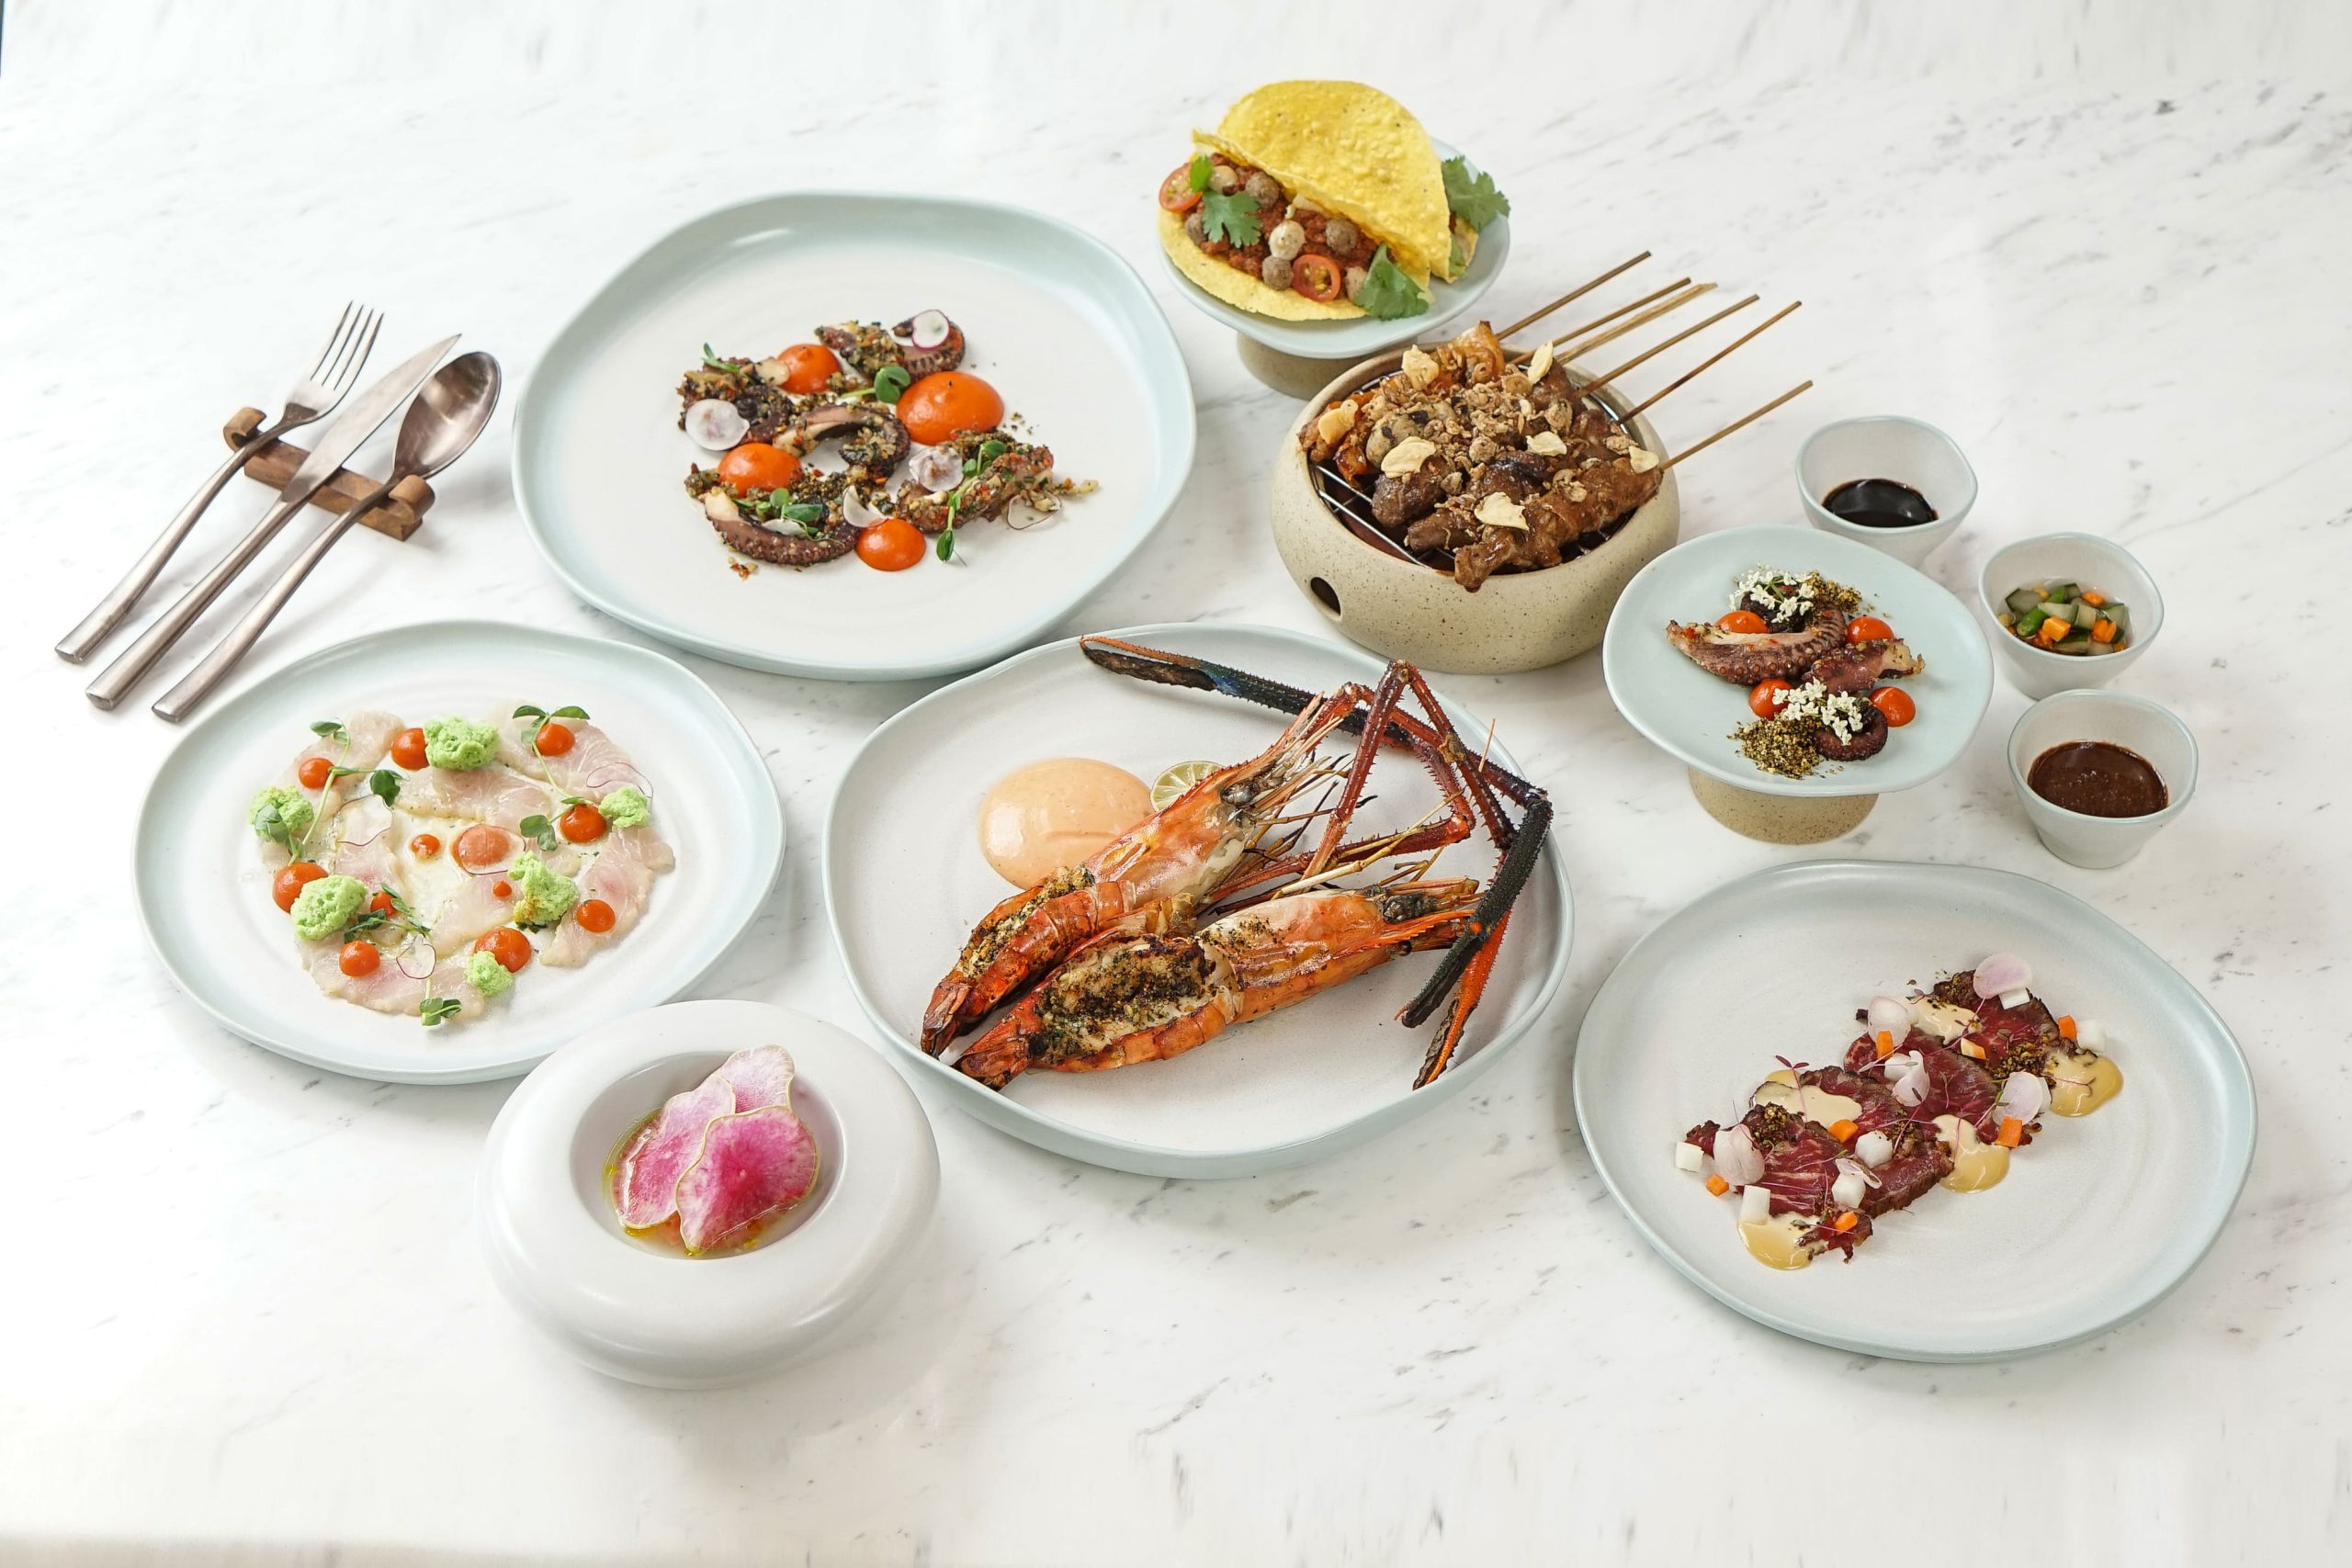 Ikan, Nusa Dua’s Elevated Beachfront Dining Destination is Now Open